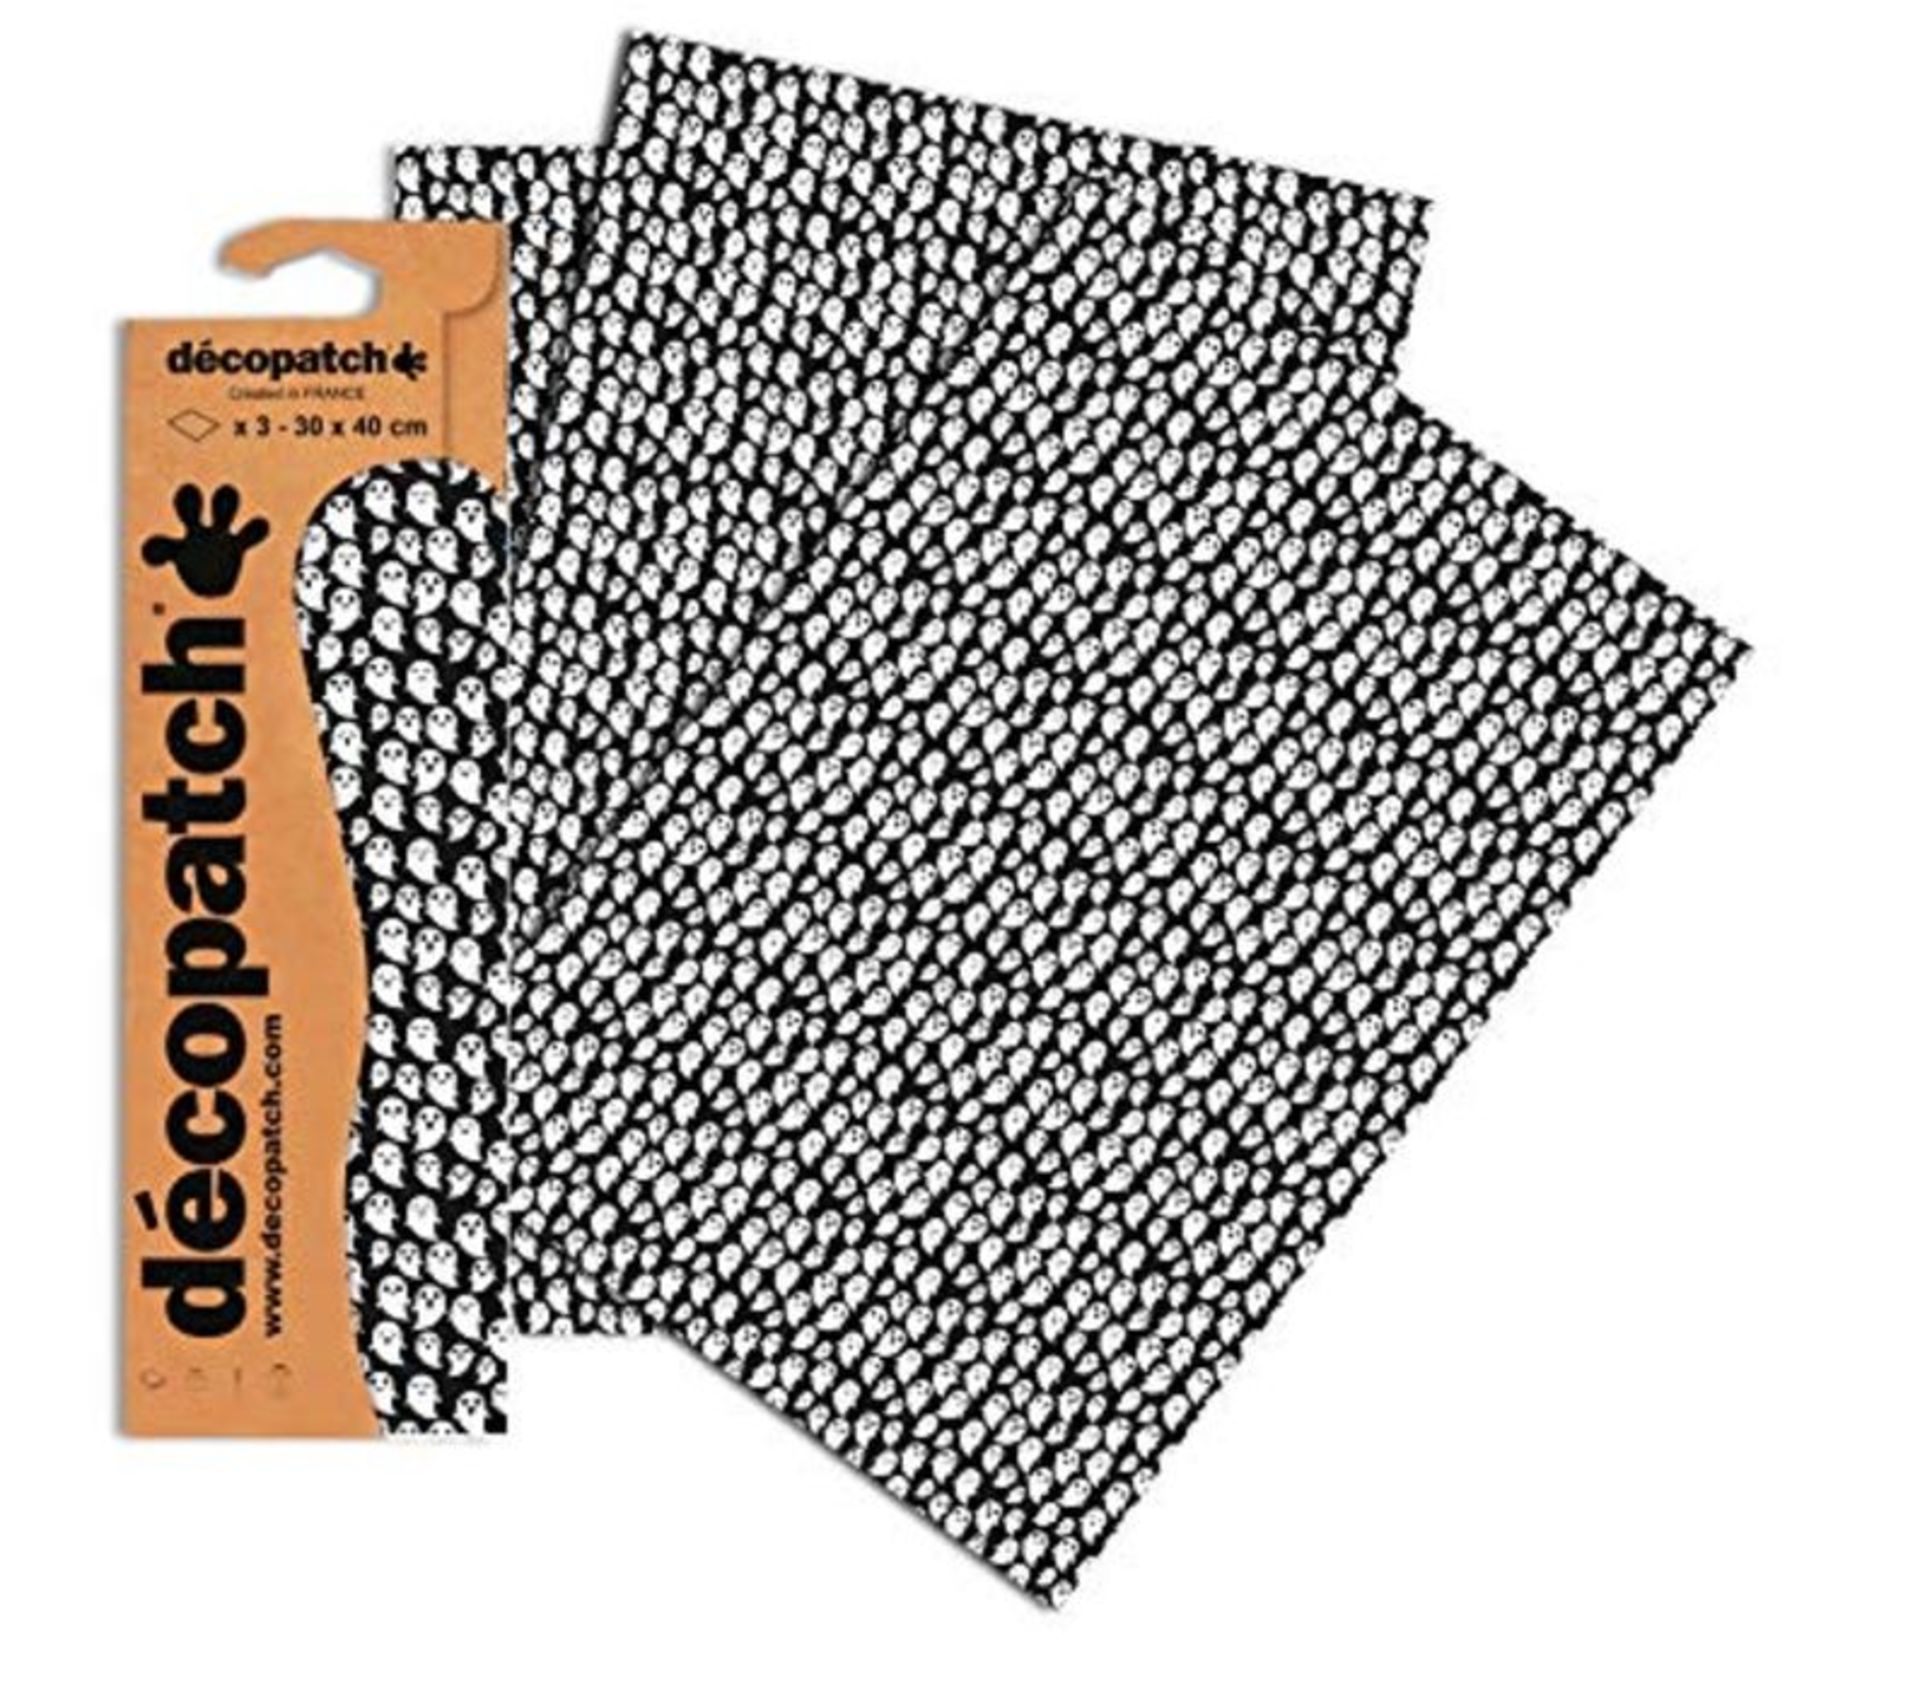 D?opatch Halloween Ghosts Paper, 30x40 cm (Pack of 3 sheets)